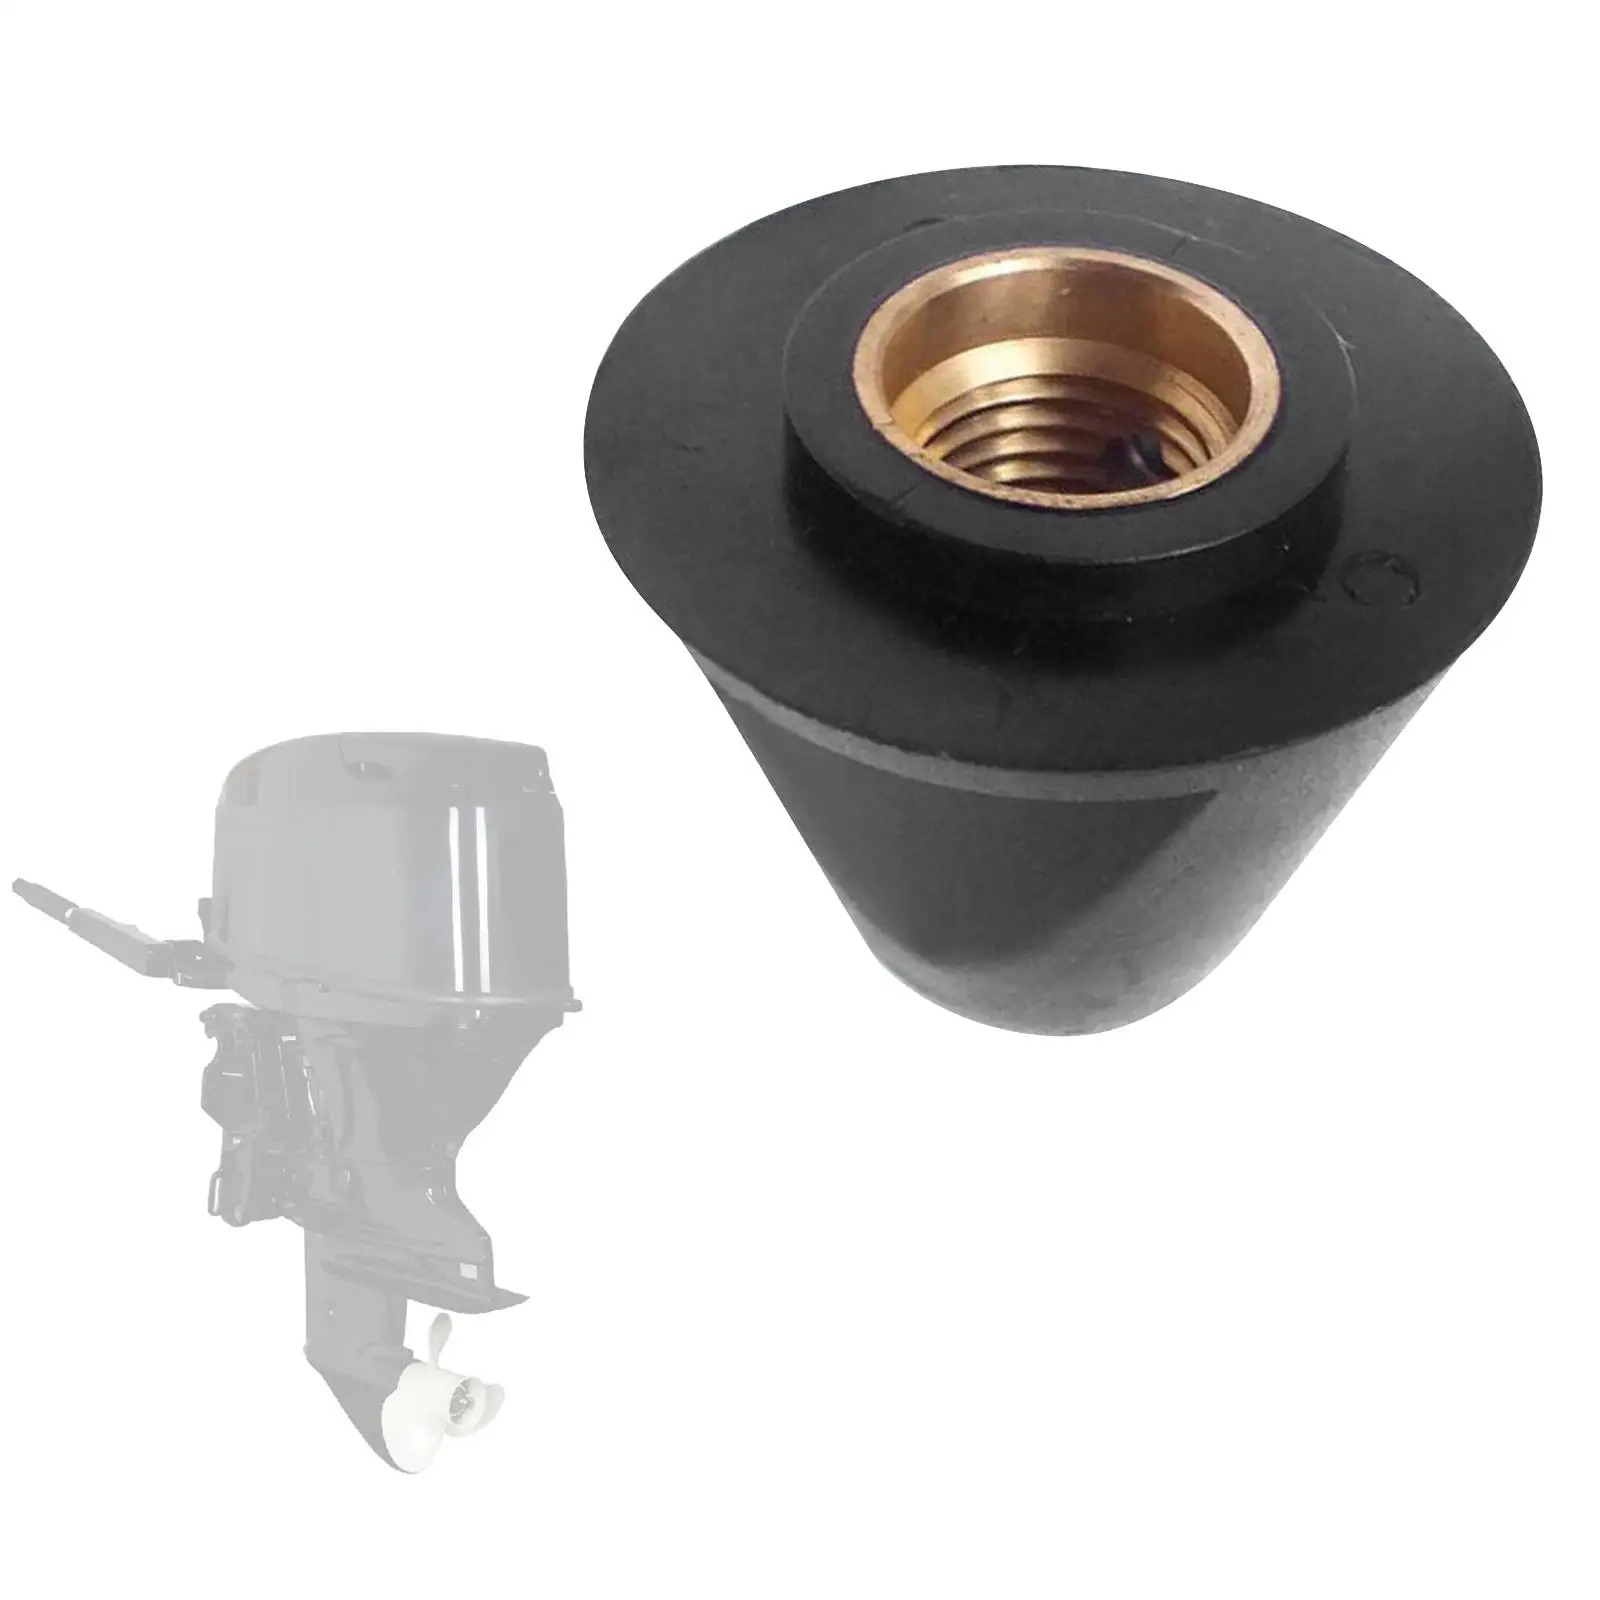 Propeller Prop Nut 647-45616-02 for Yamaha Outboard Engine 4HP 5HP 2T Boat